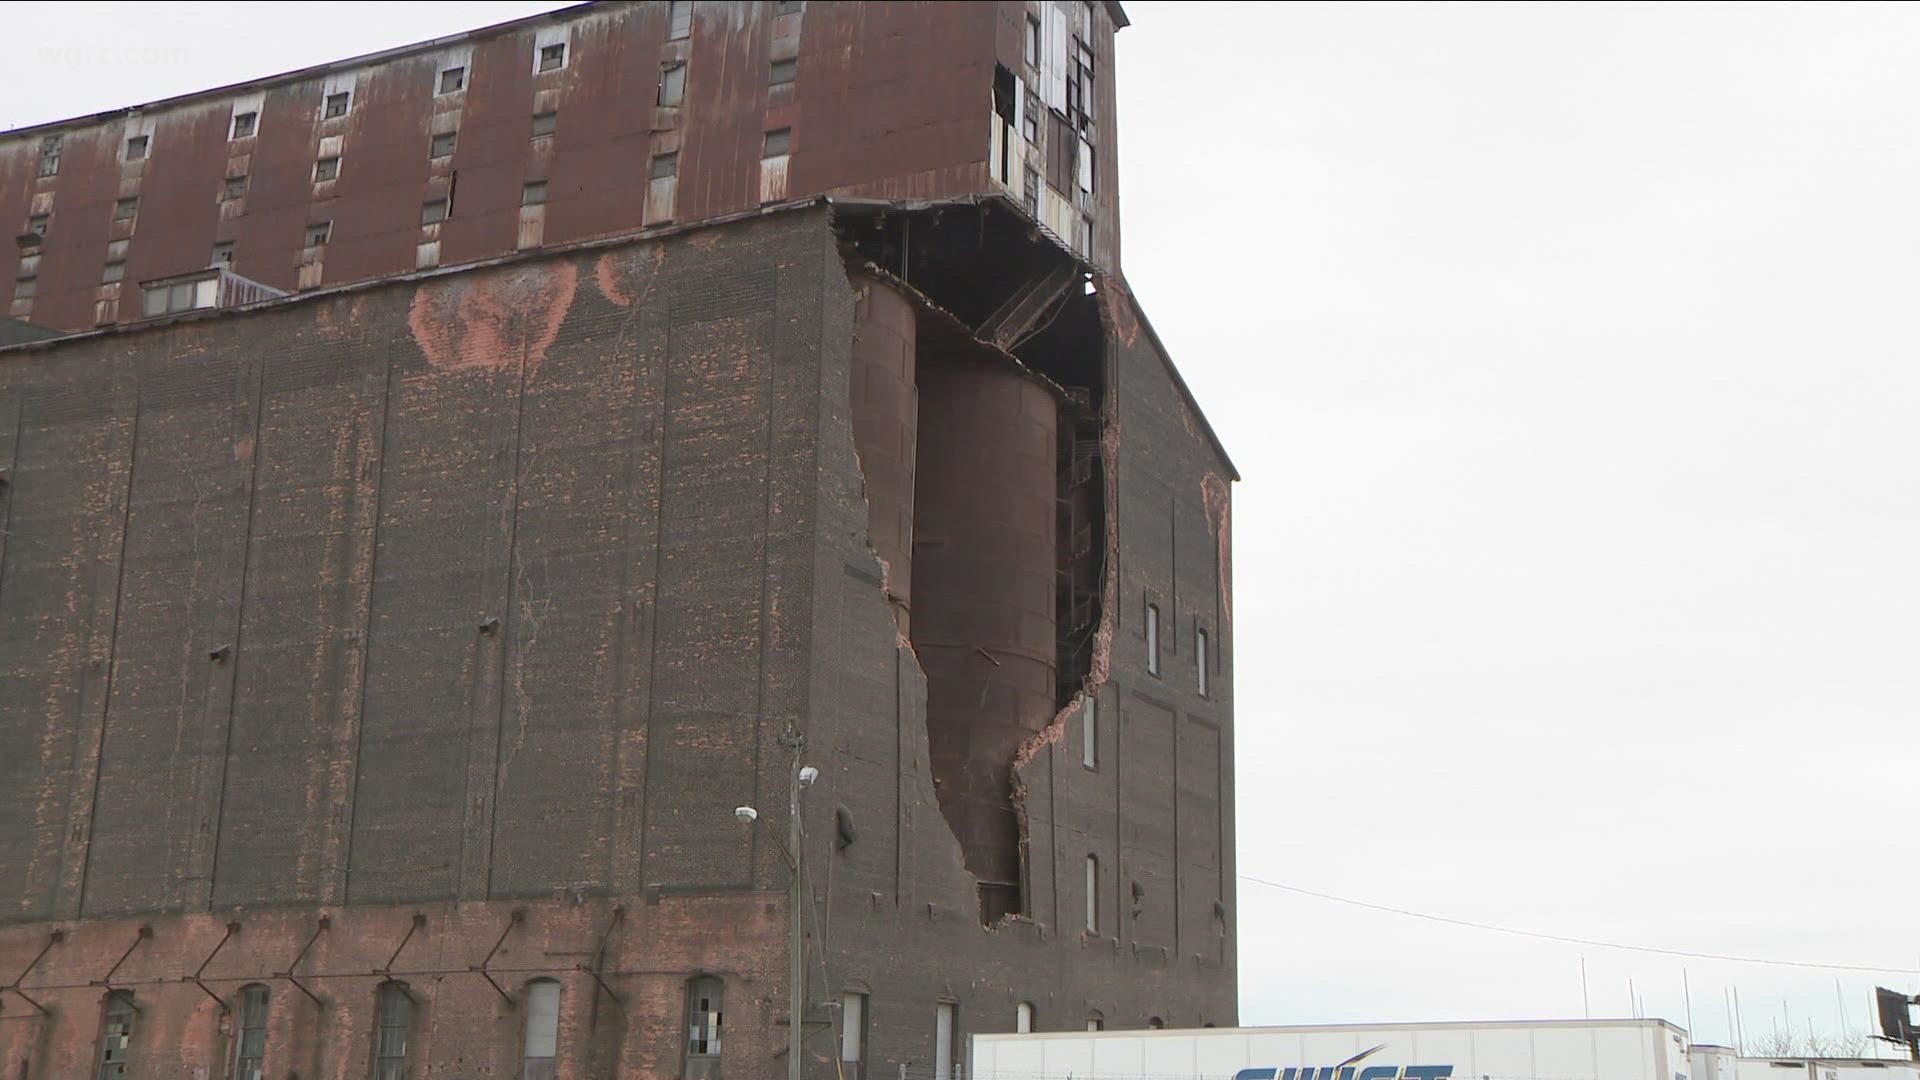 Local Preservationists Look To Save Wind Damaged Grain Silo